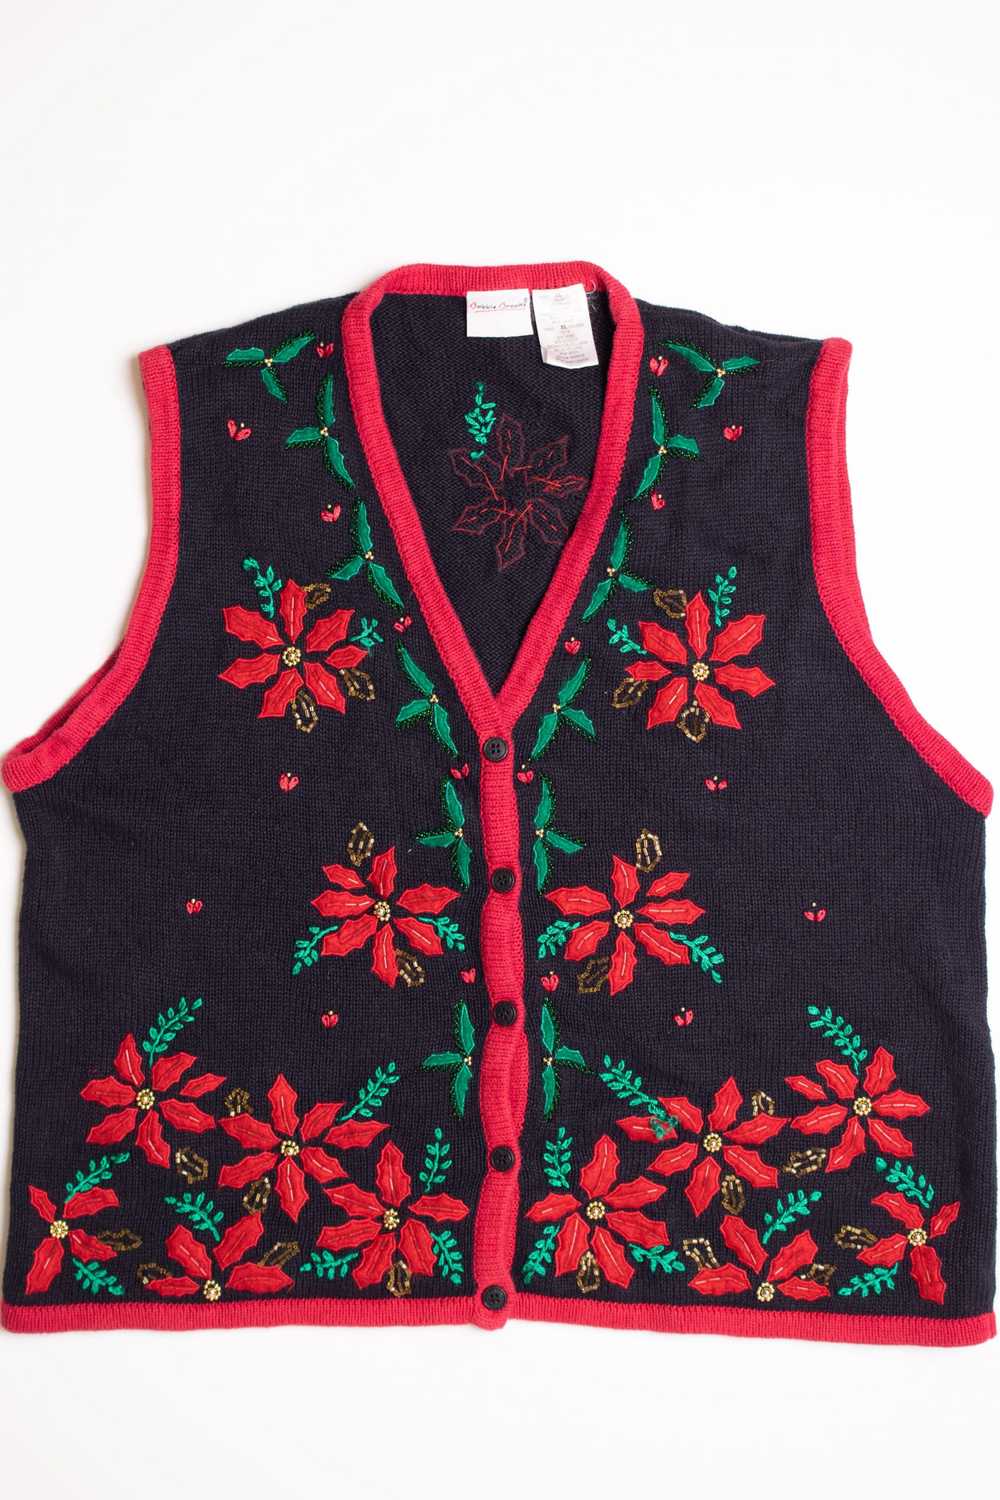 Ugly Christmas Sweater Vest 104 - image 2